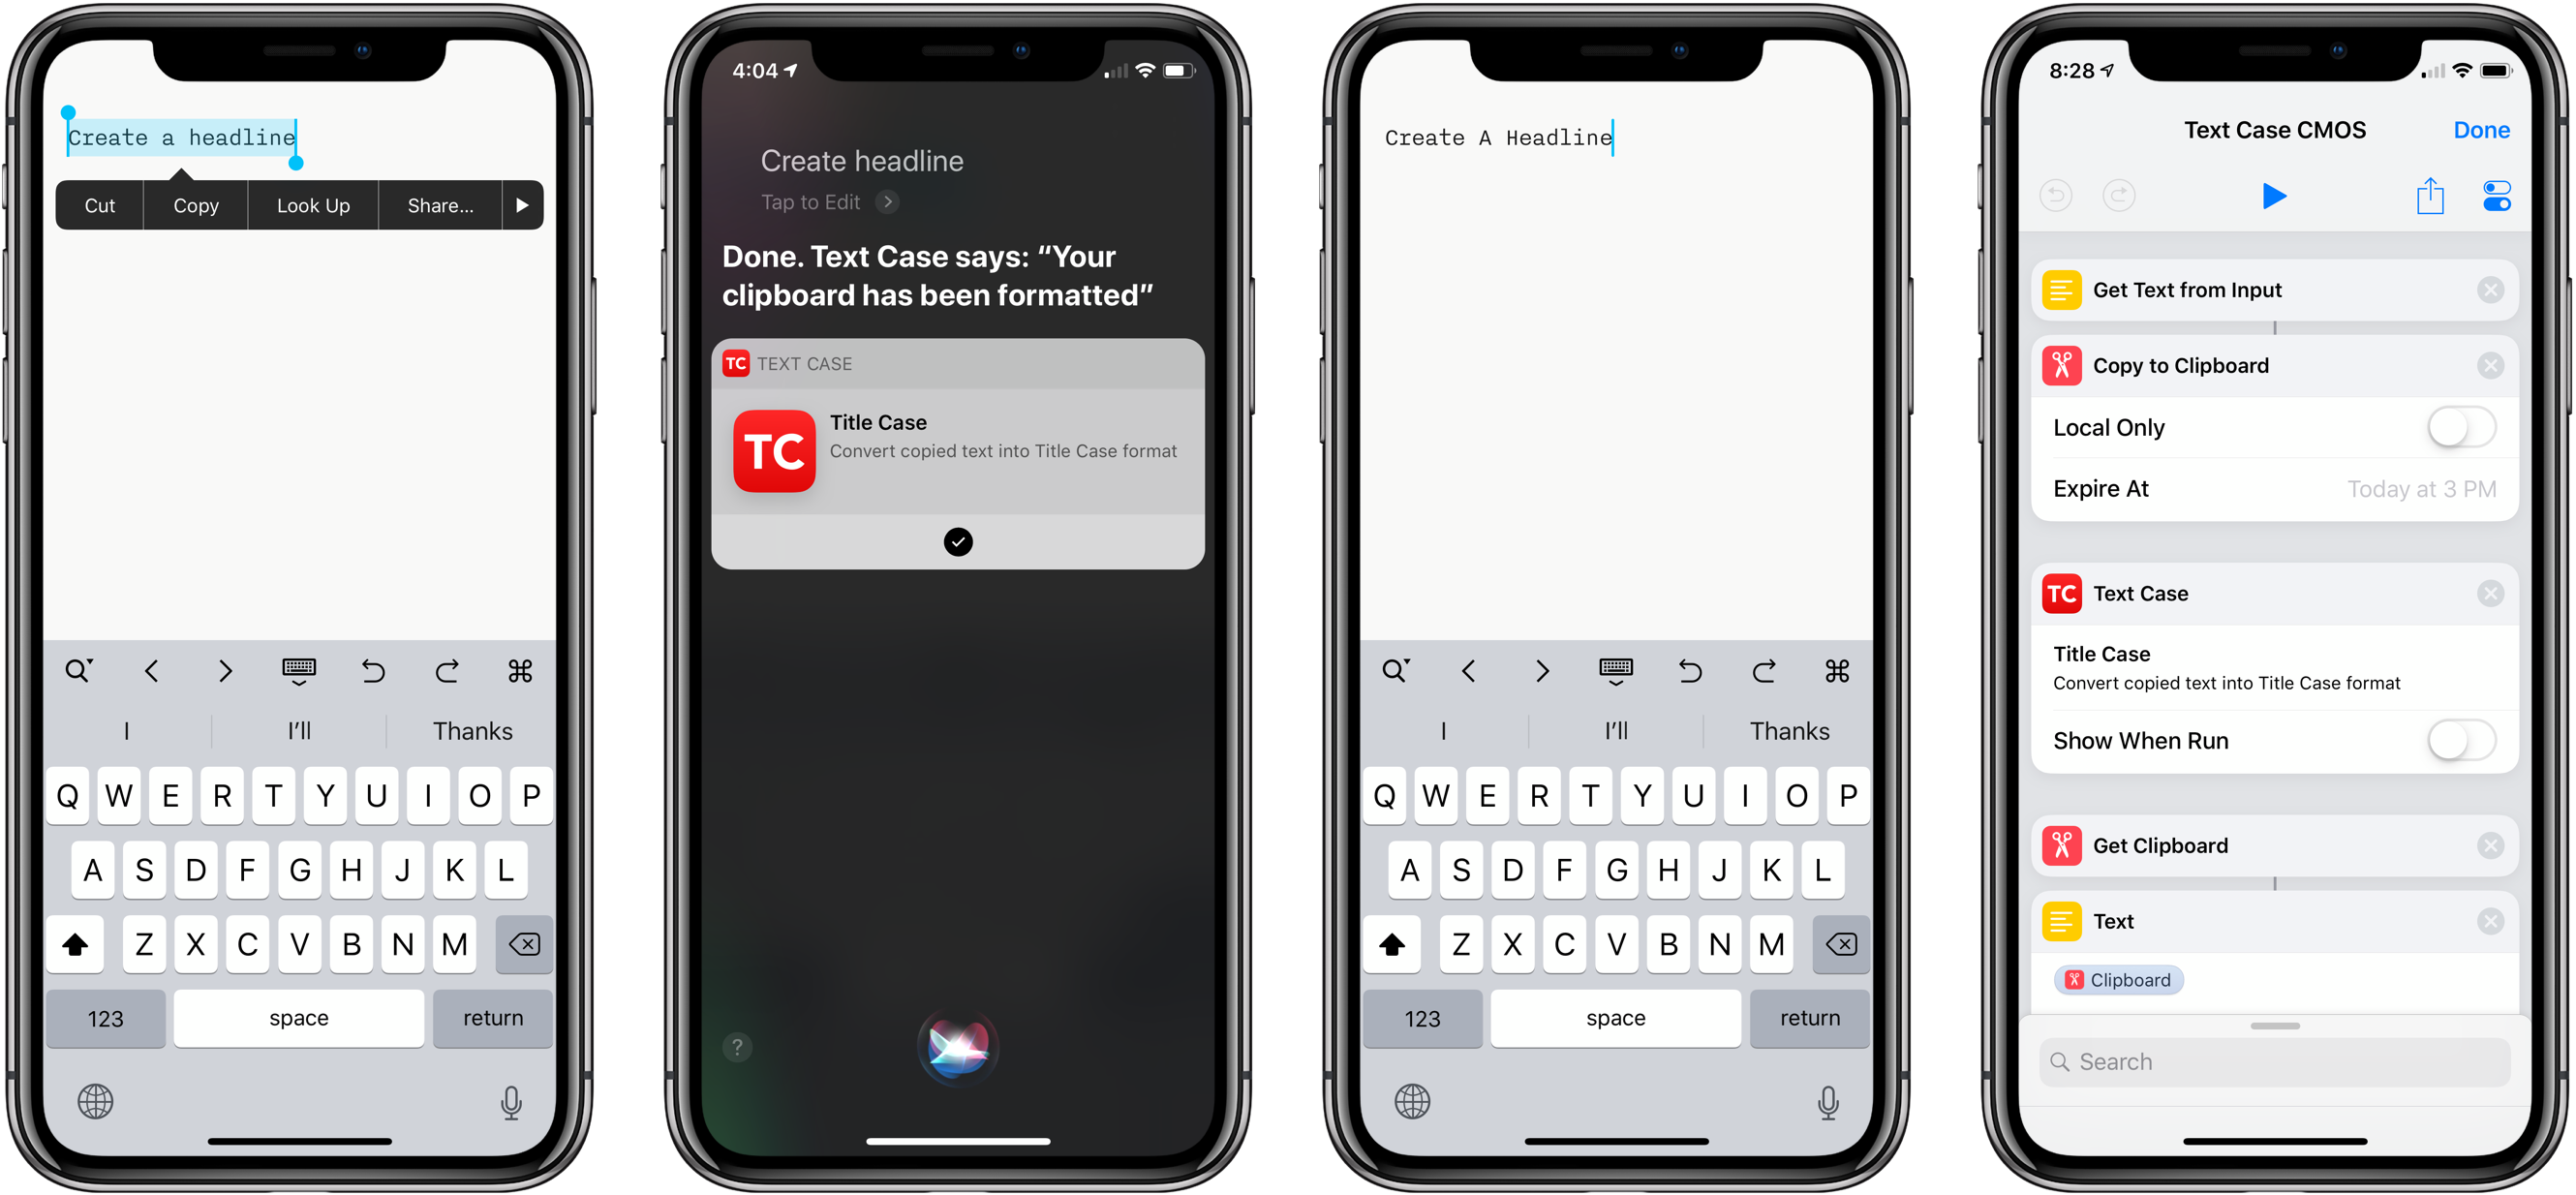 Using Text Case with Siri and embedding it in a custom shortcut.